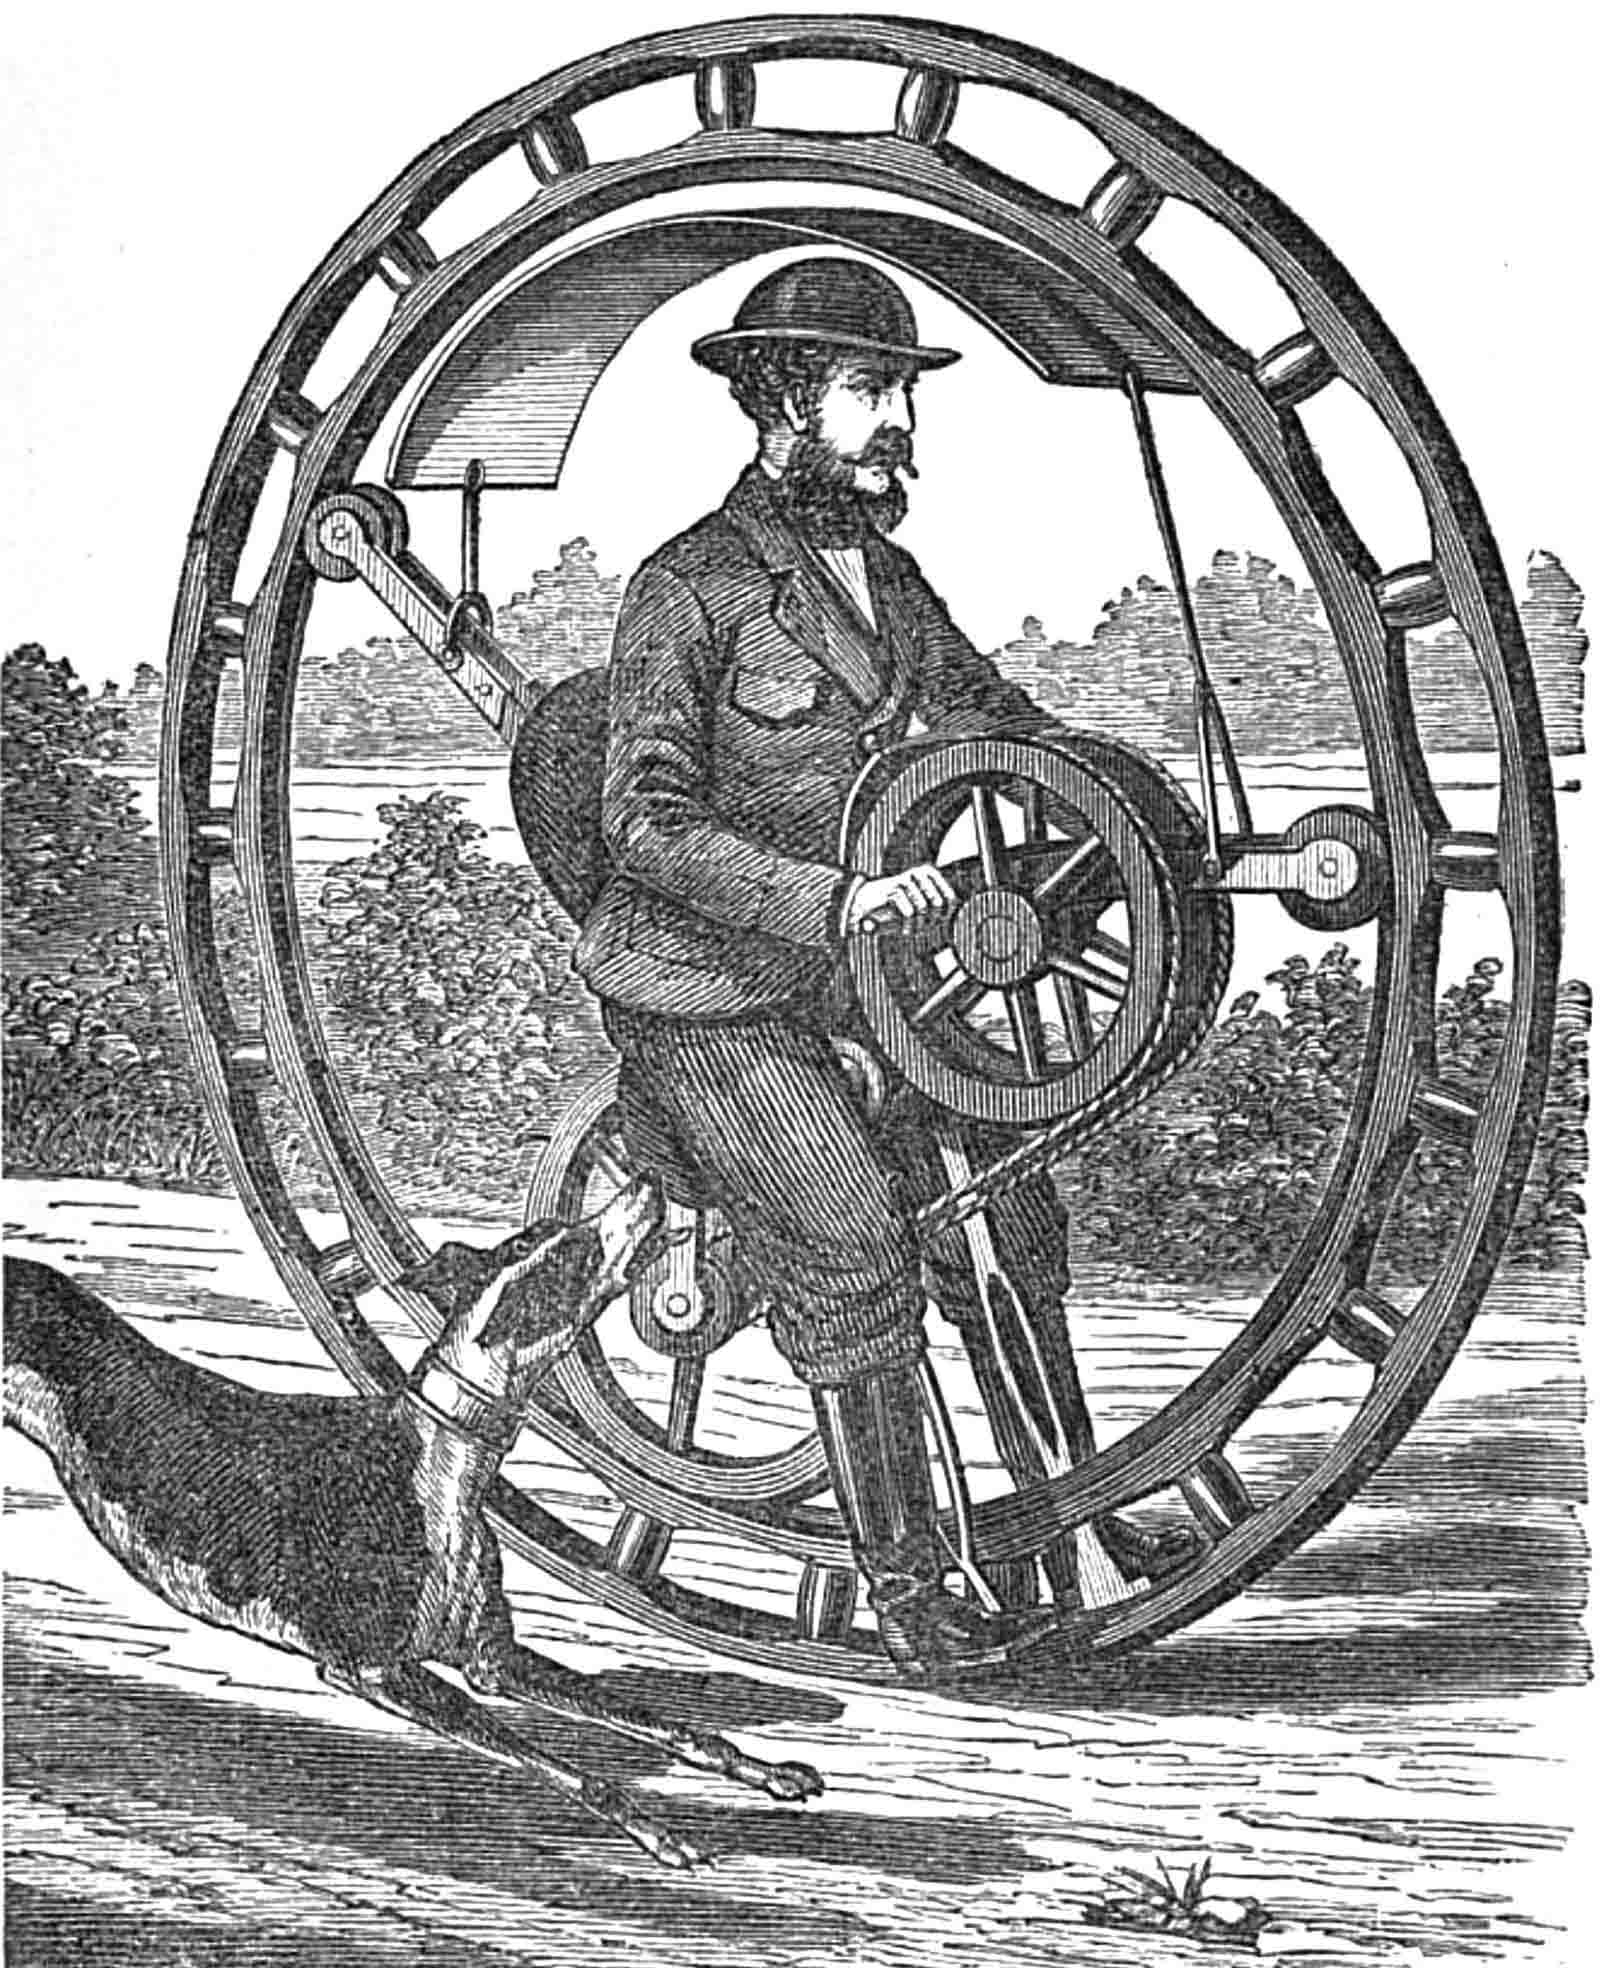 Hemming’s Unicycle, or “Flying Yankee Velocipede”, was a hand-powered monowheel patented in 1869 by Richard C. Hemming.